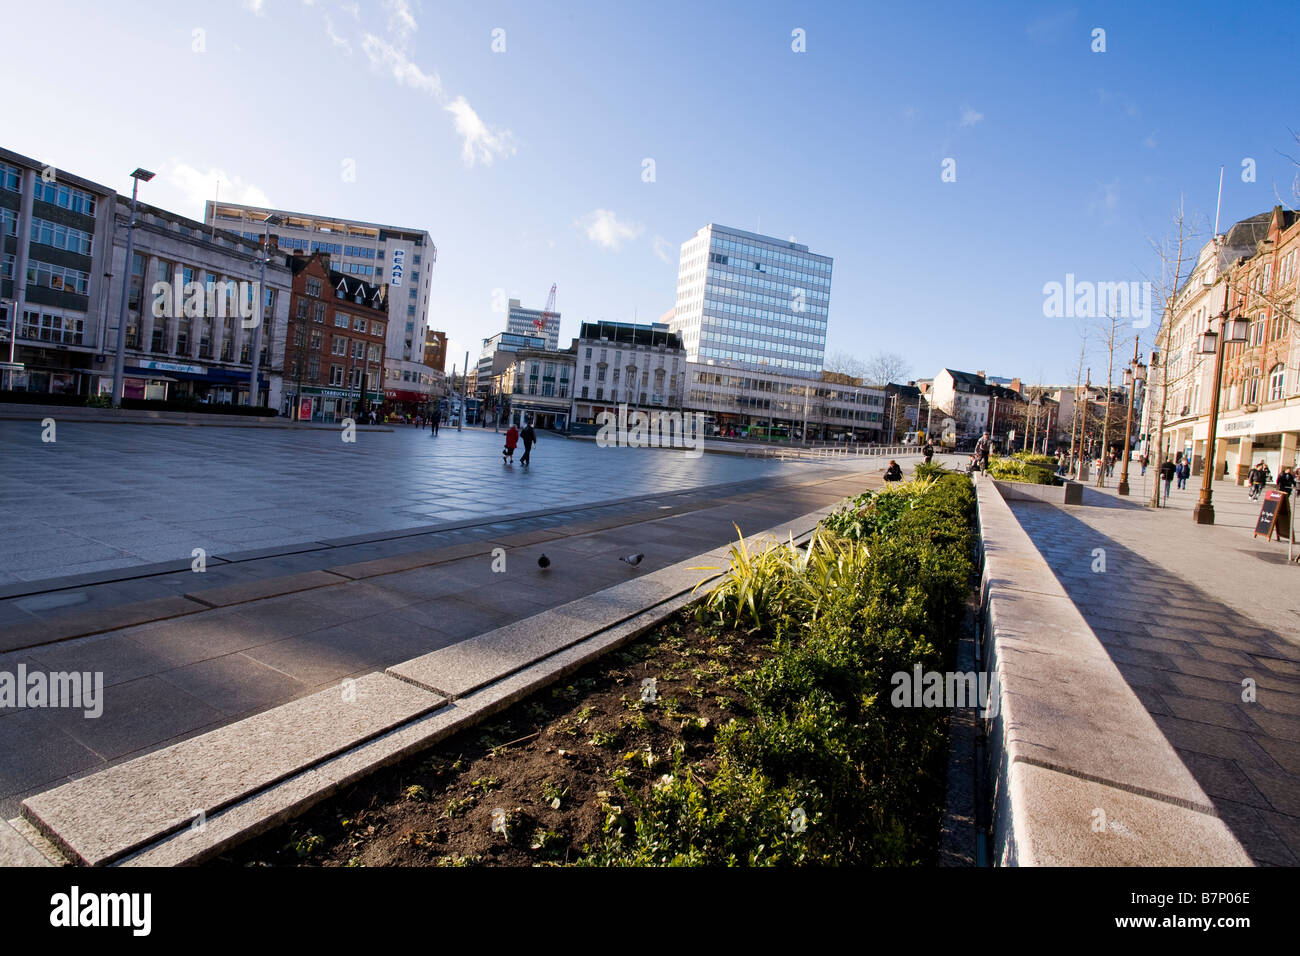 The redeveloped Old Market Square in Nottingham, England. The floral display in the centre is an ancient border which once divided Nottingham. Stock Photo